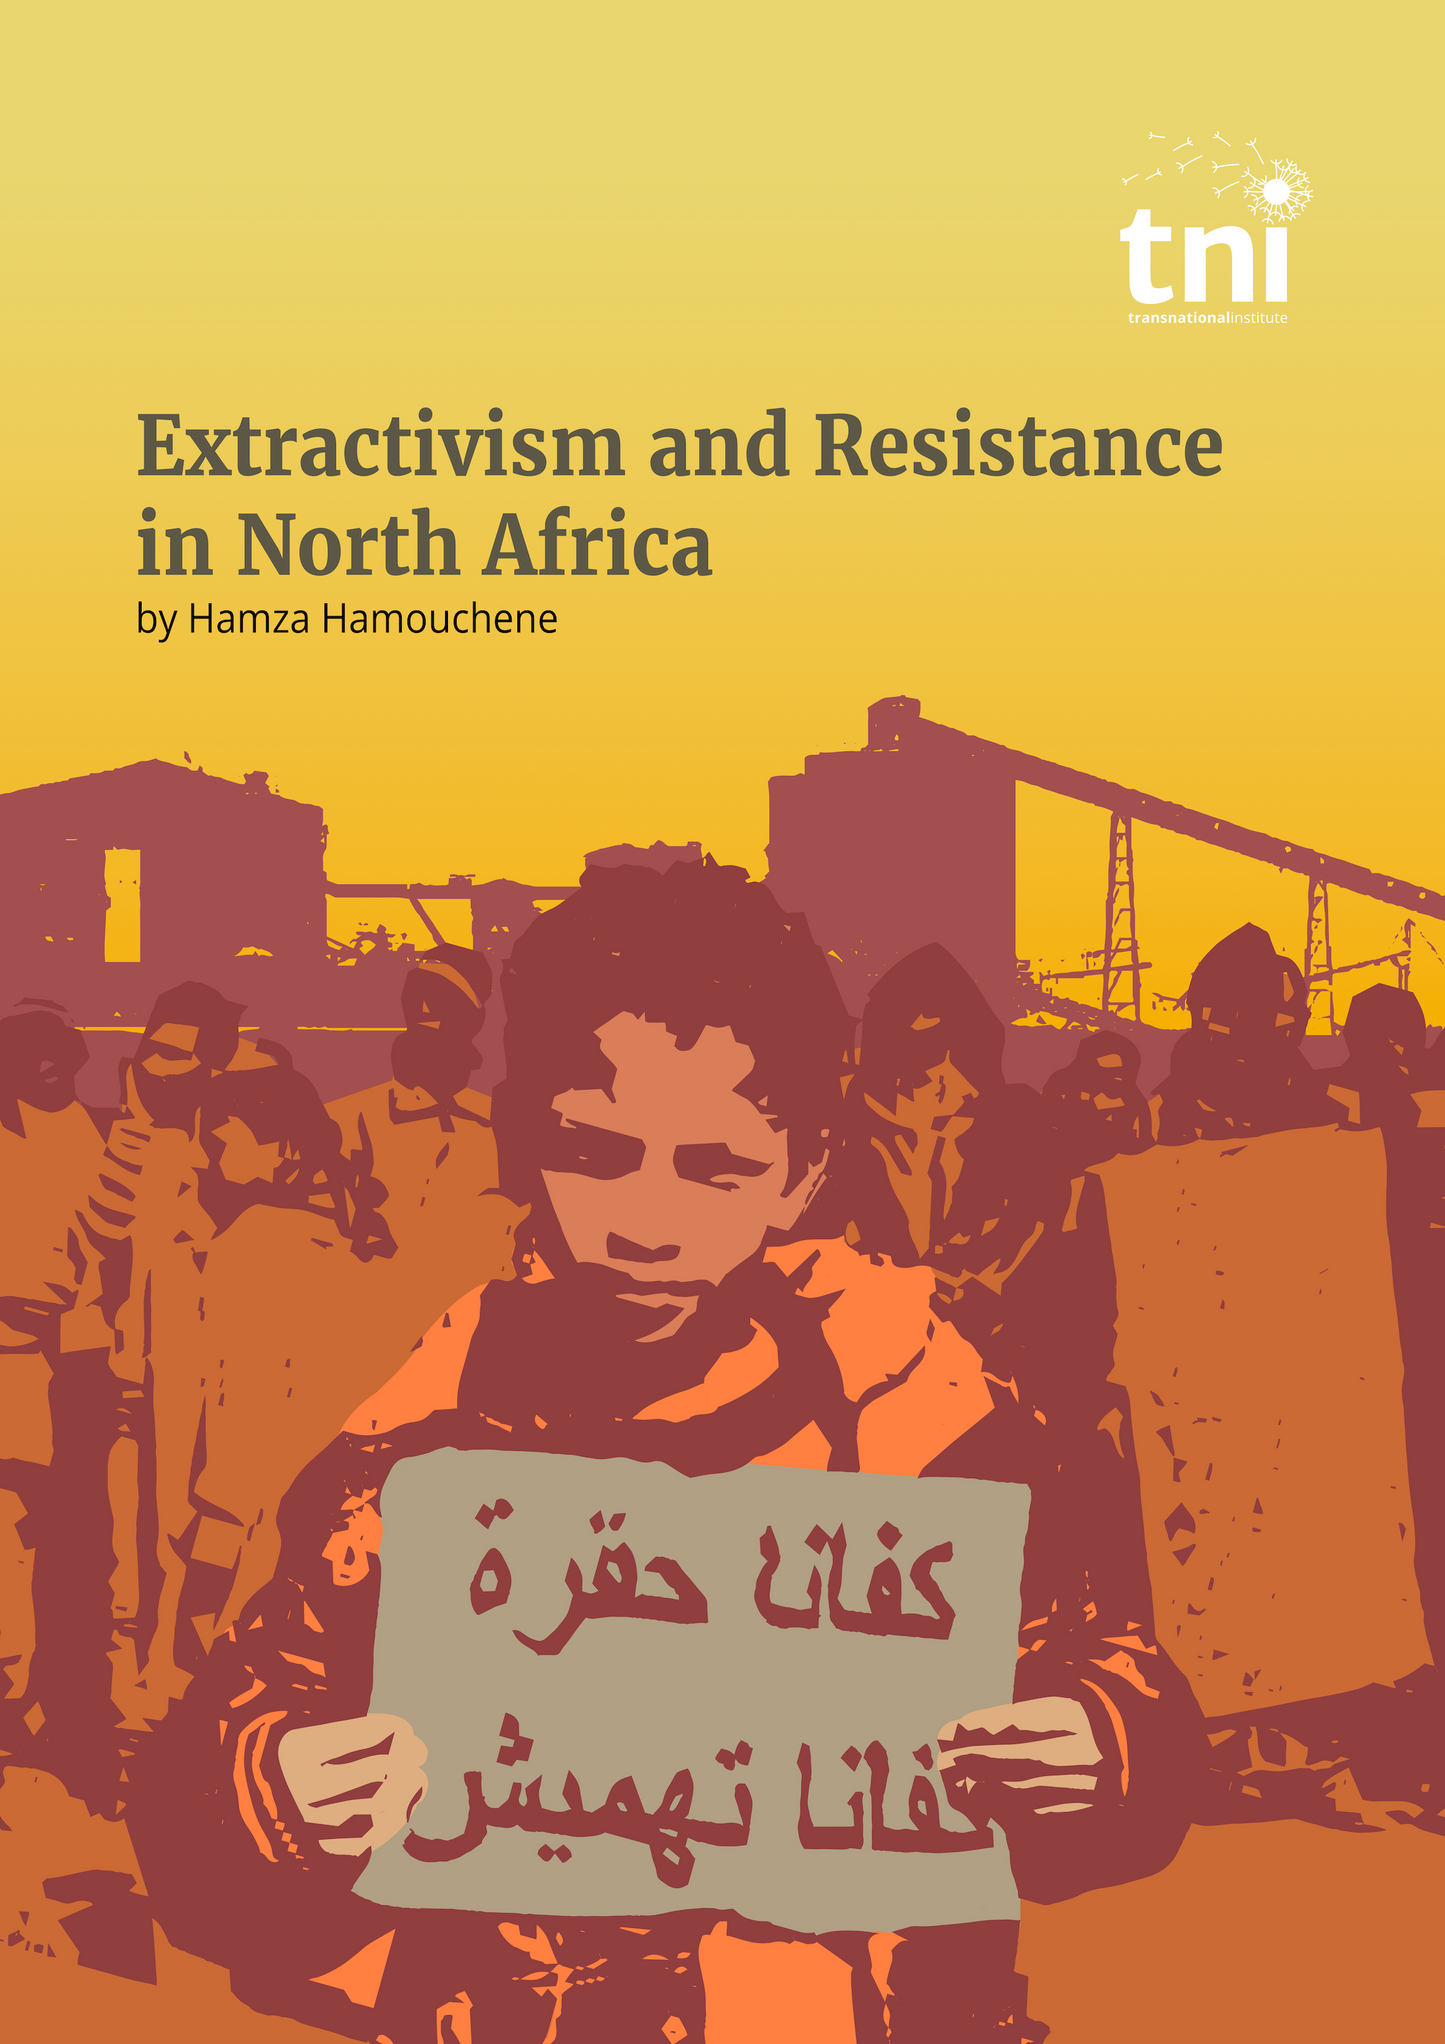 Extractivism and resistance in North Africa